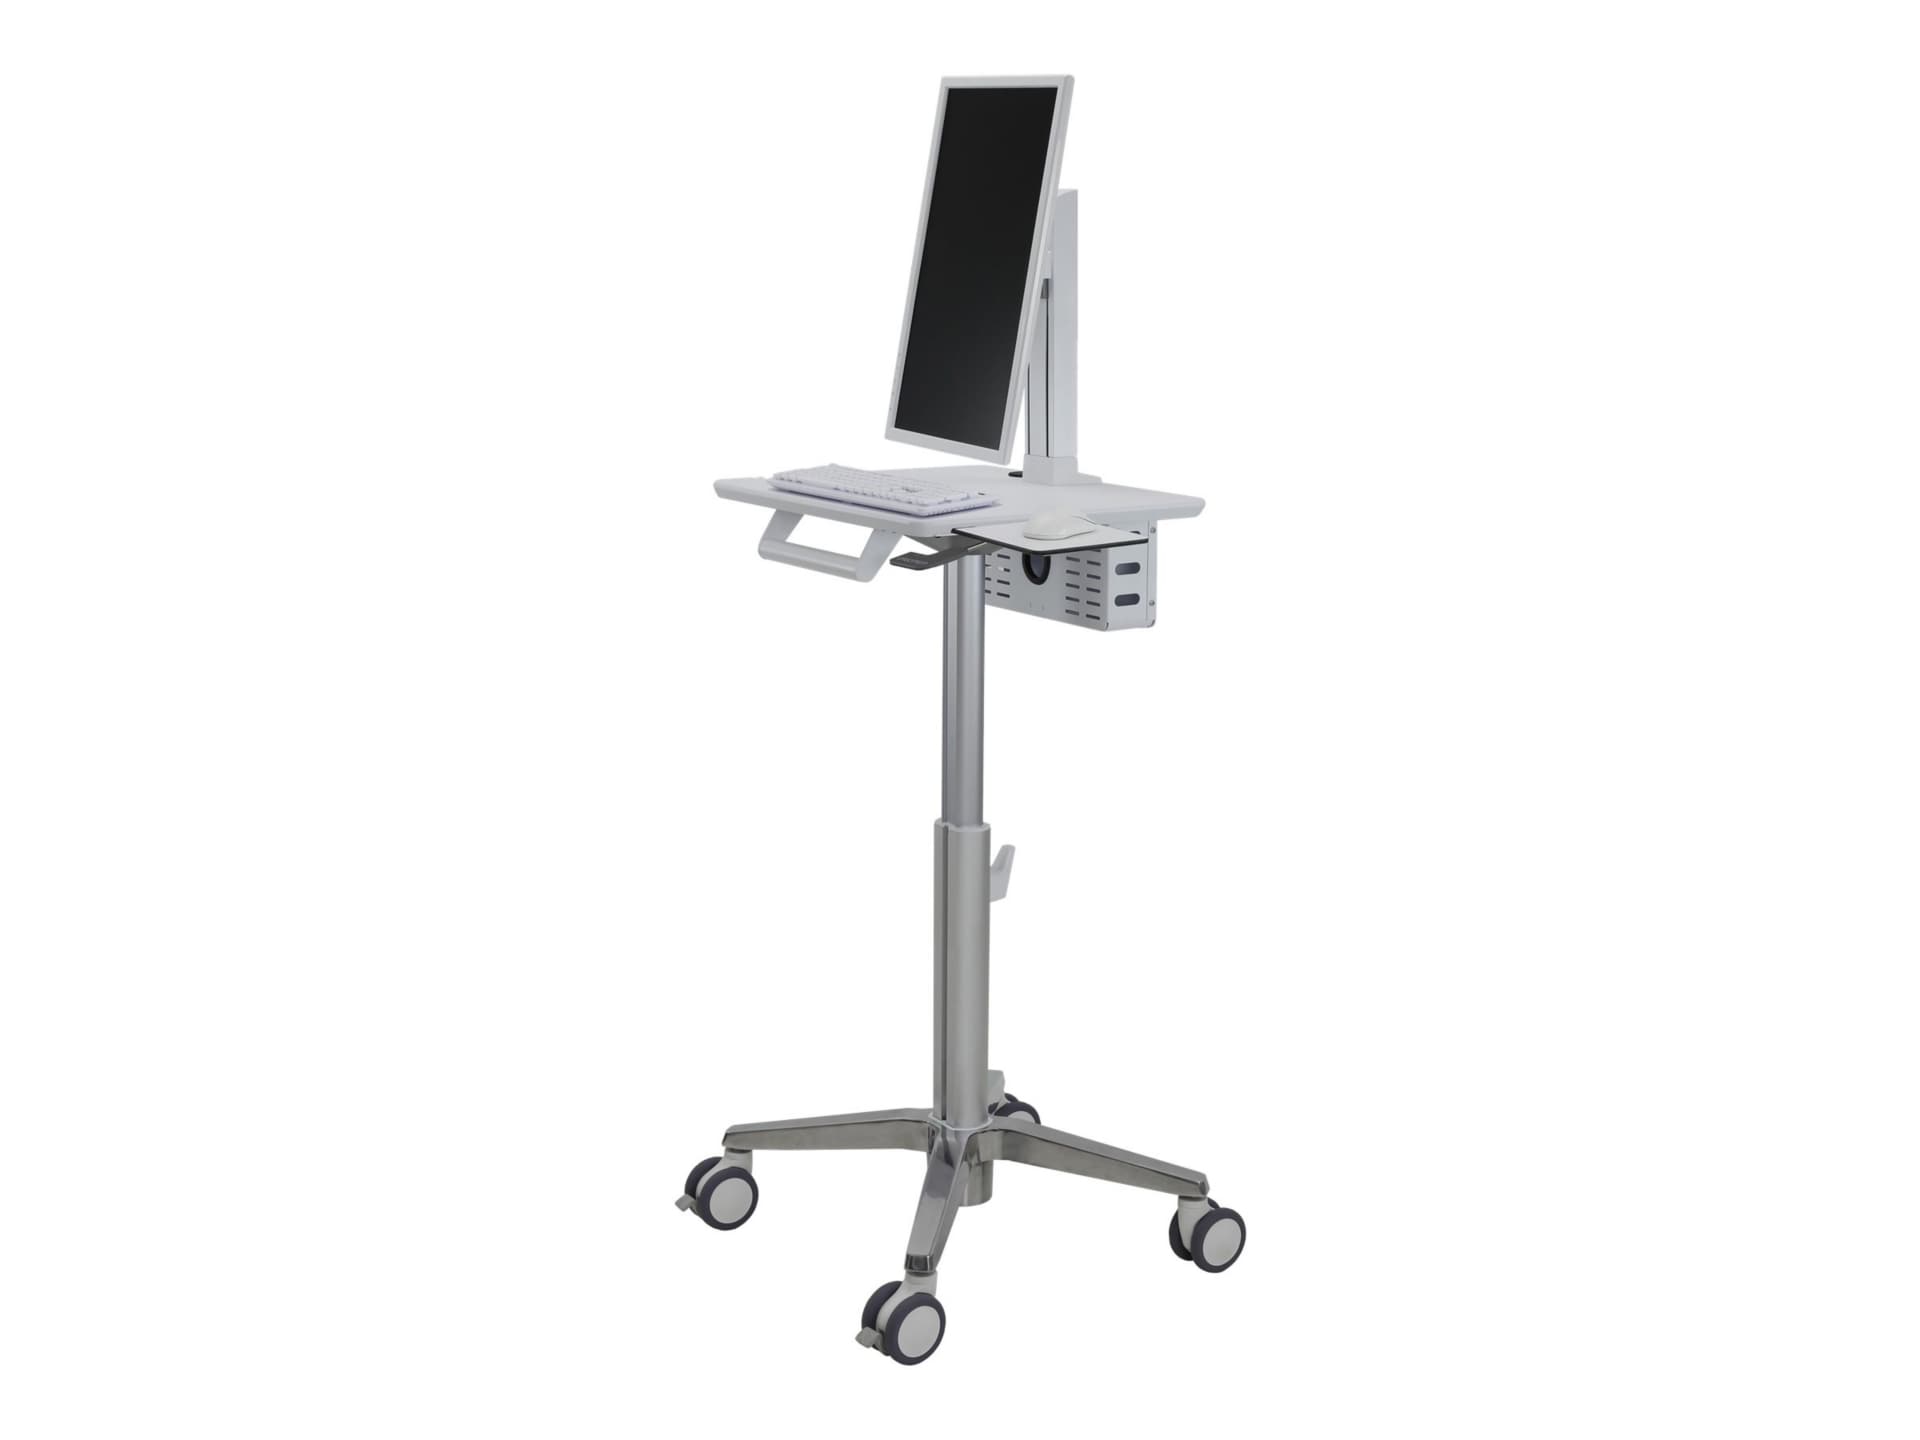 Ergotron StyleView Lean WOW SV10 cart - light-duty - for LCD display / keyboard / mouse - white, aluminum